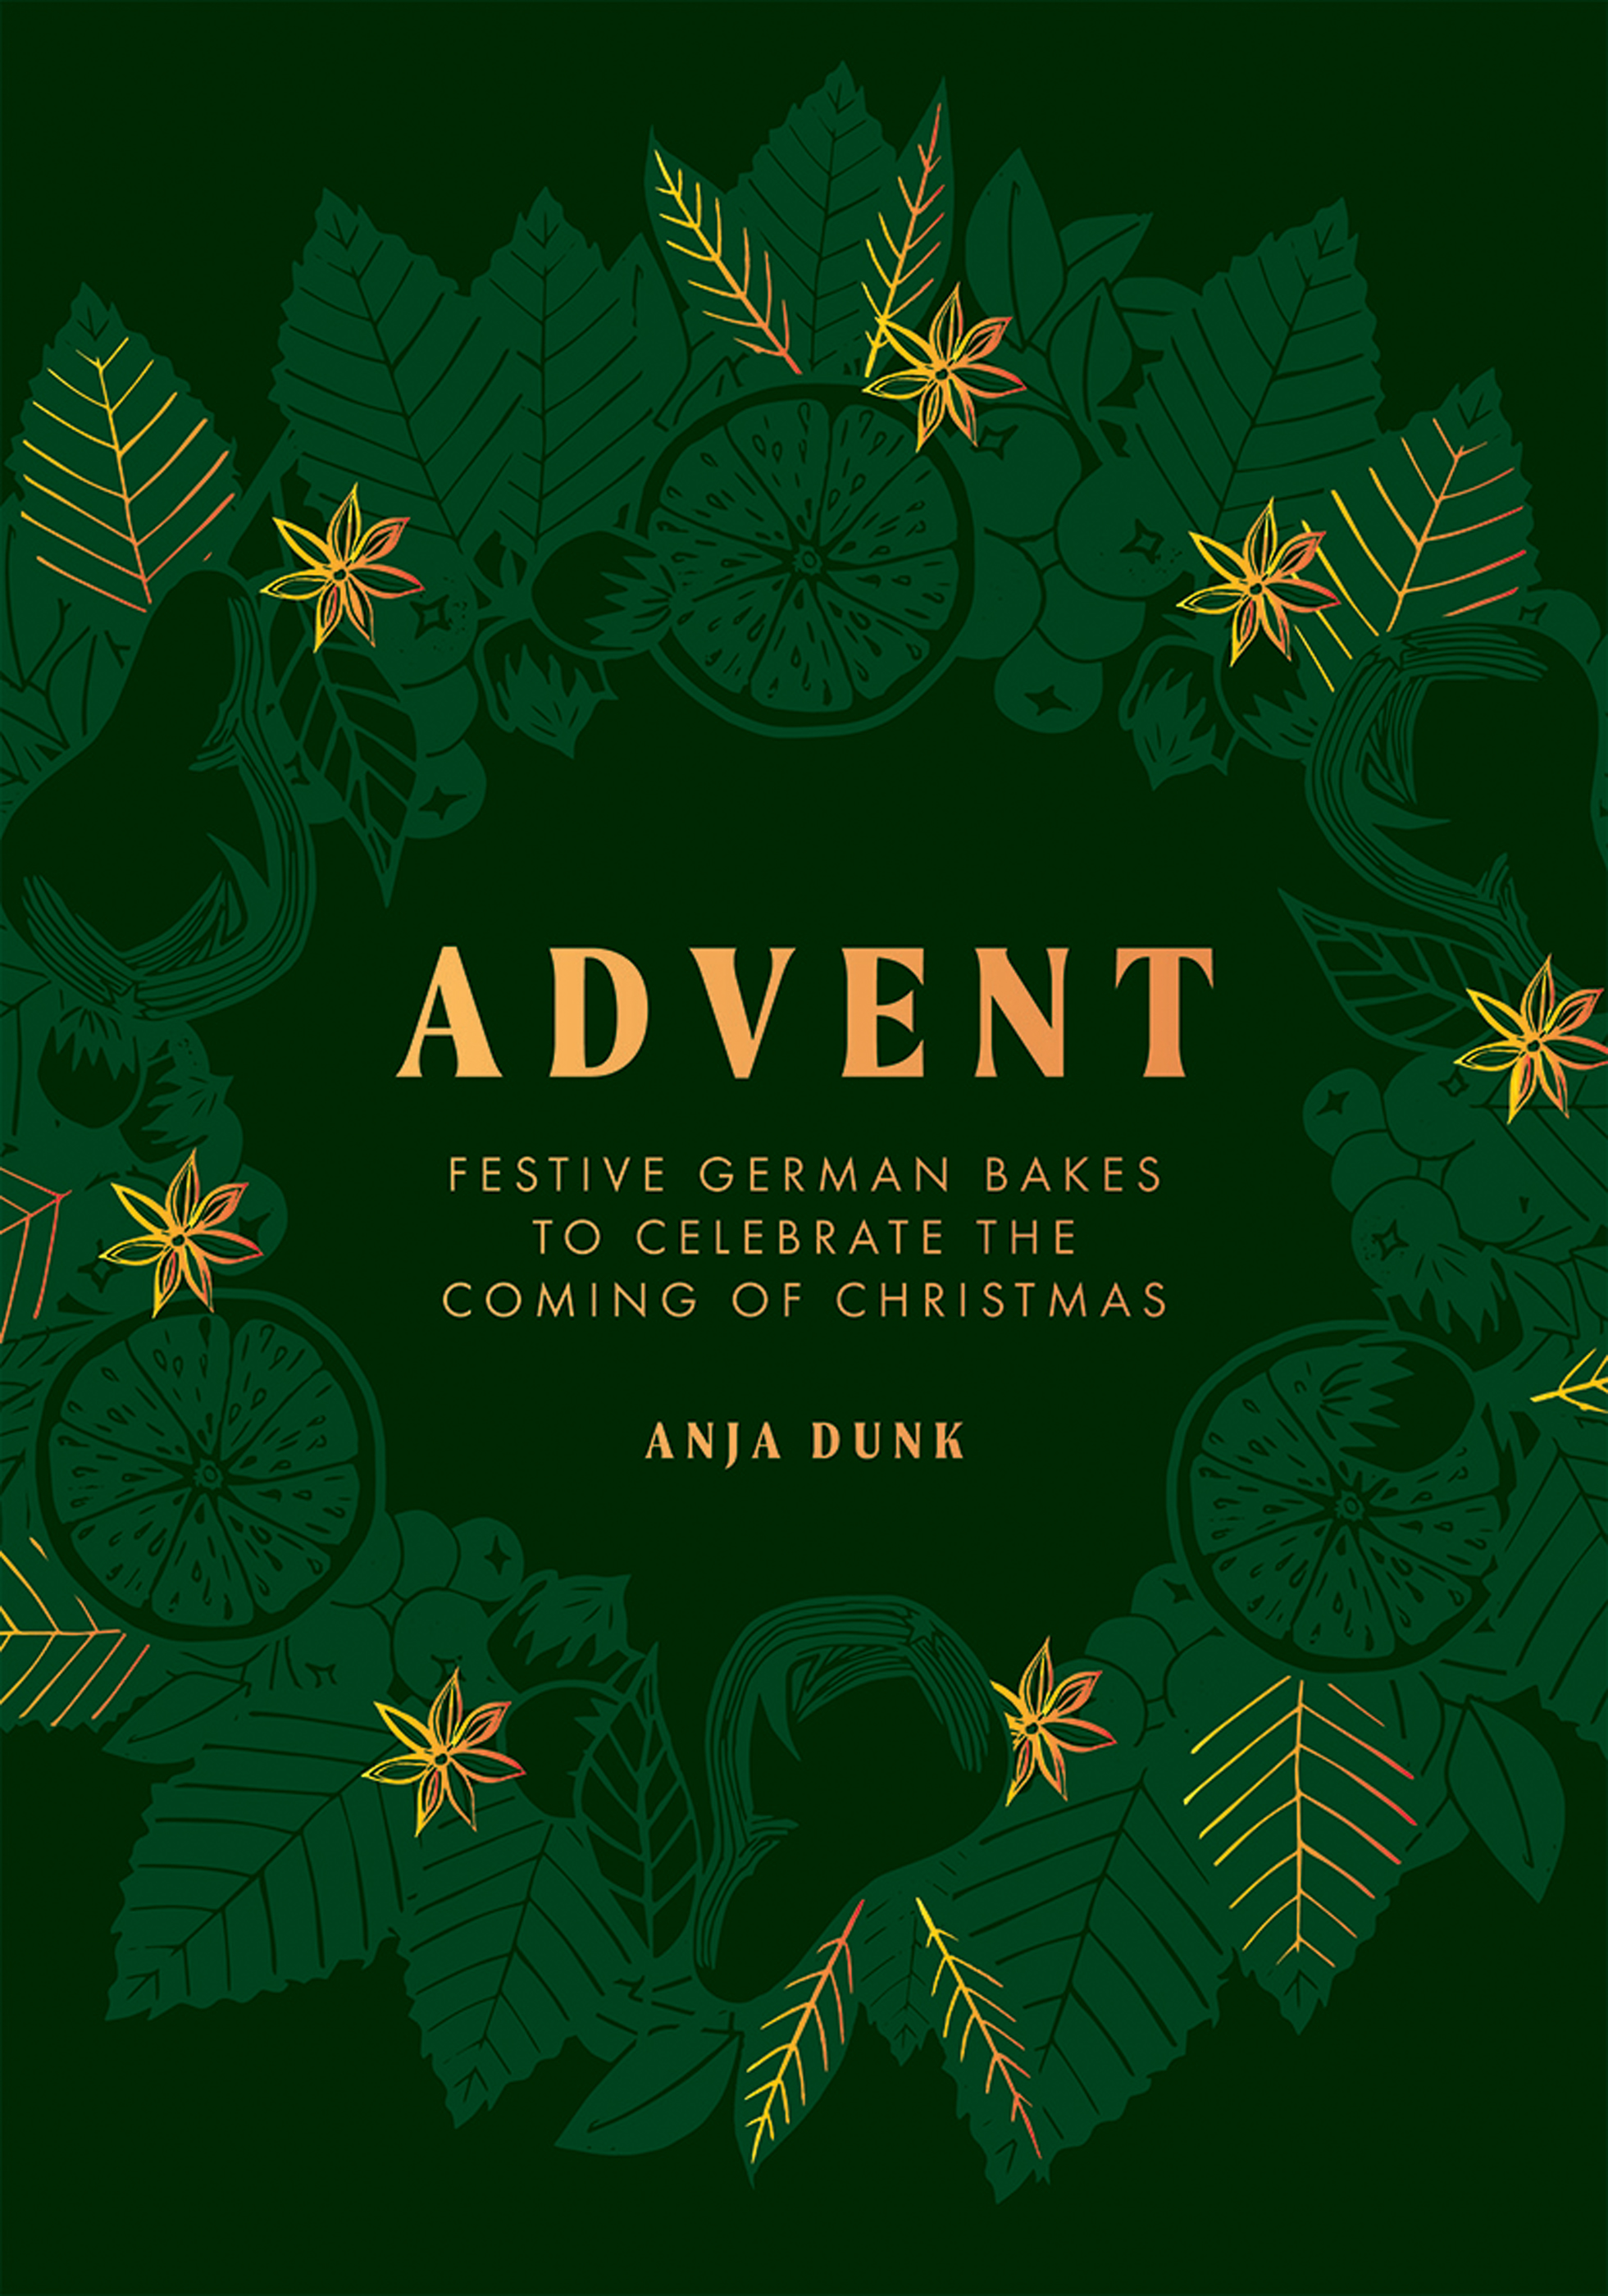 ADVENT: Festive German Bakes to Celebrate the Coming of Christmas by Anja Dunk